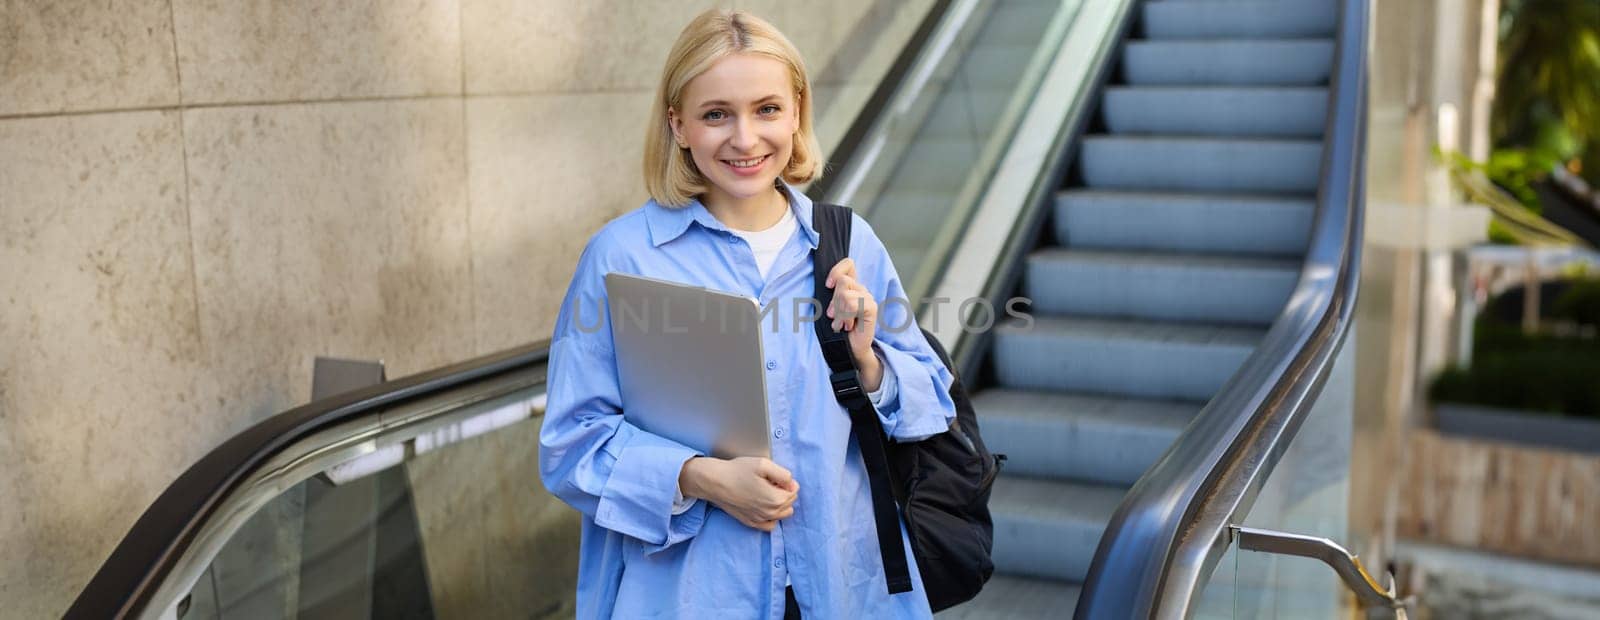 Lifestyle portrait of young blond woman, carries her backpack and laptop, using escalator in city, smiling and looking confident at camera. Education and people concept